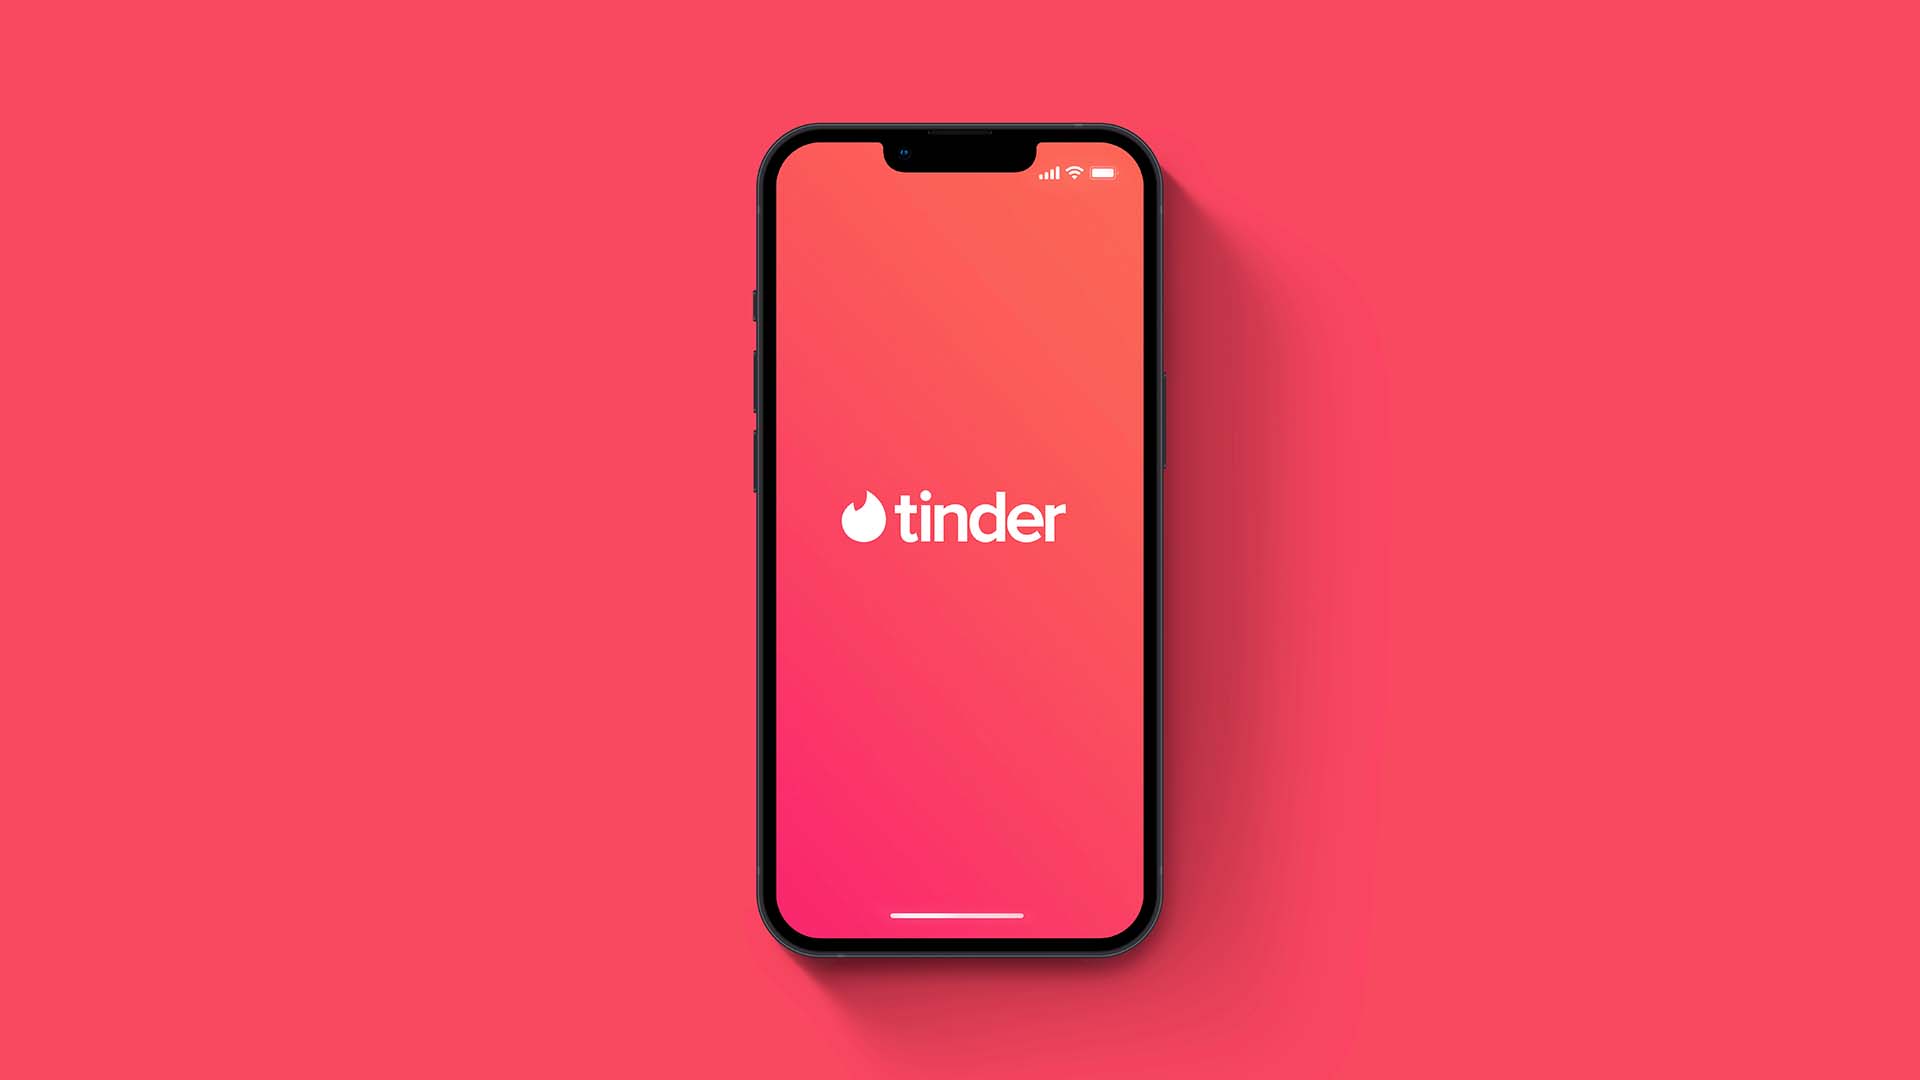 Mobile phone in front of coral background. The phone's screen has the same color with a white tinder logo at the center.